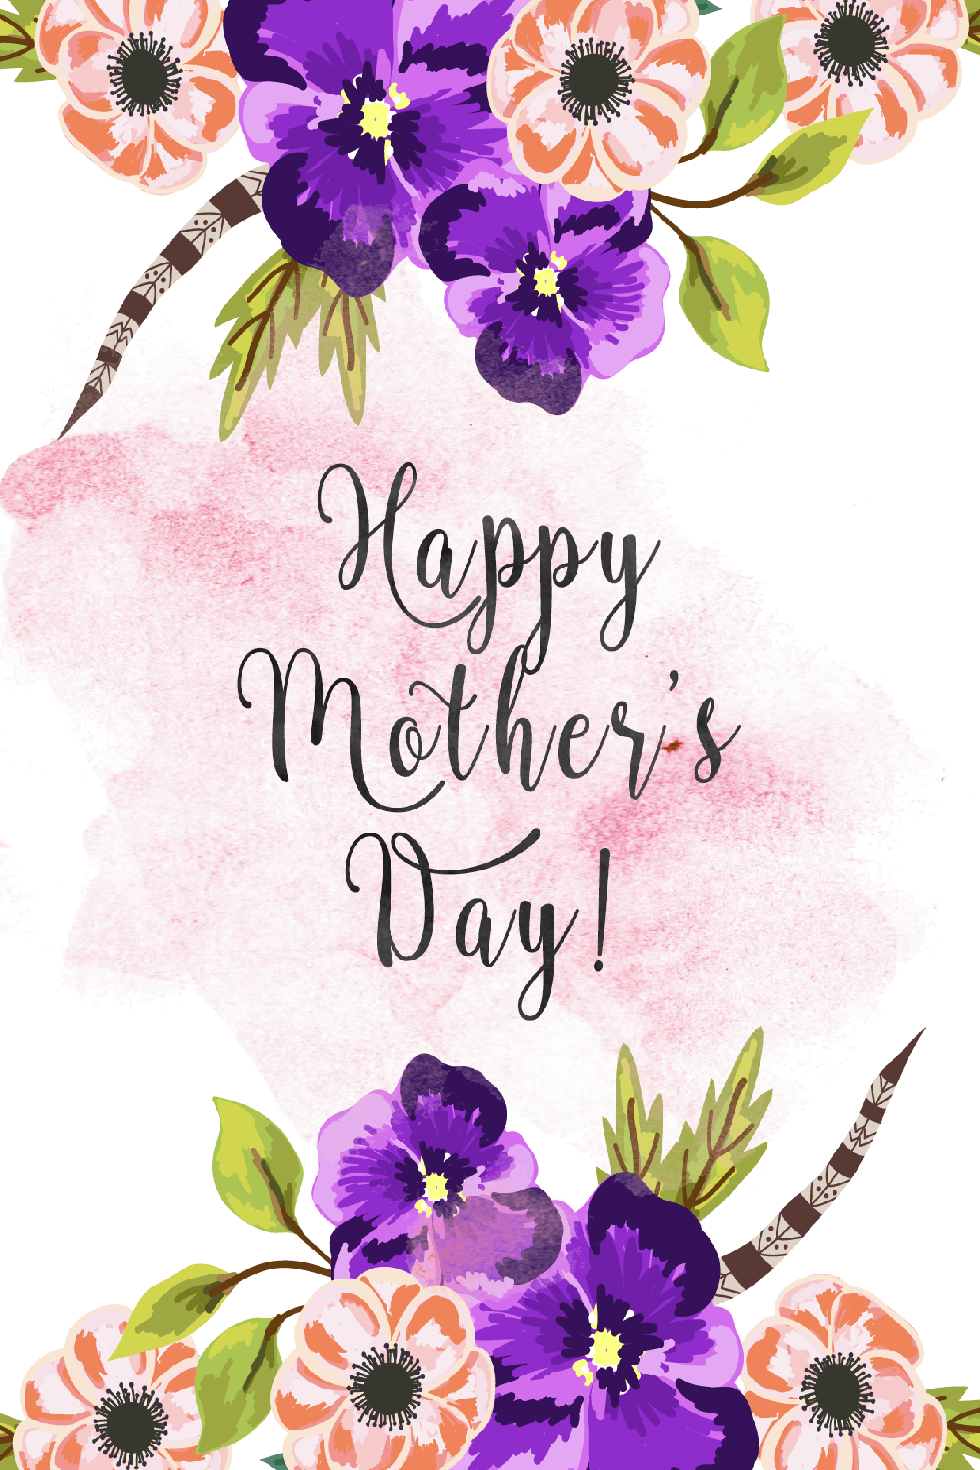 free printable card with purple and pink floral artwork that says happy mother's day